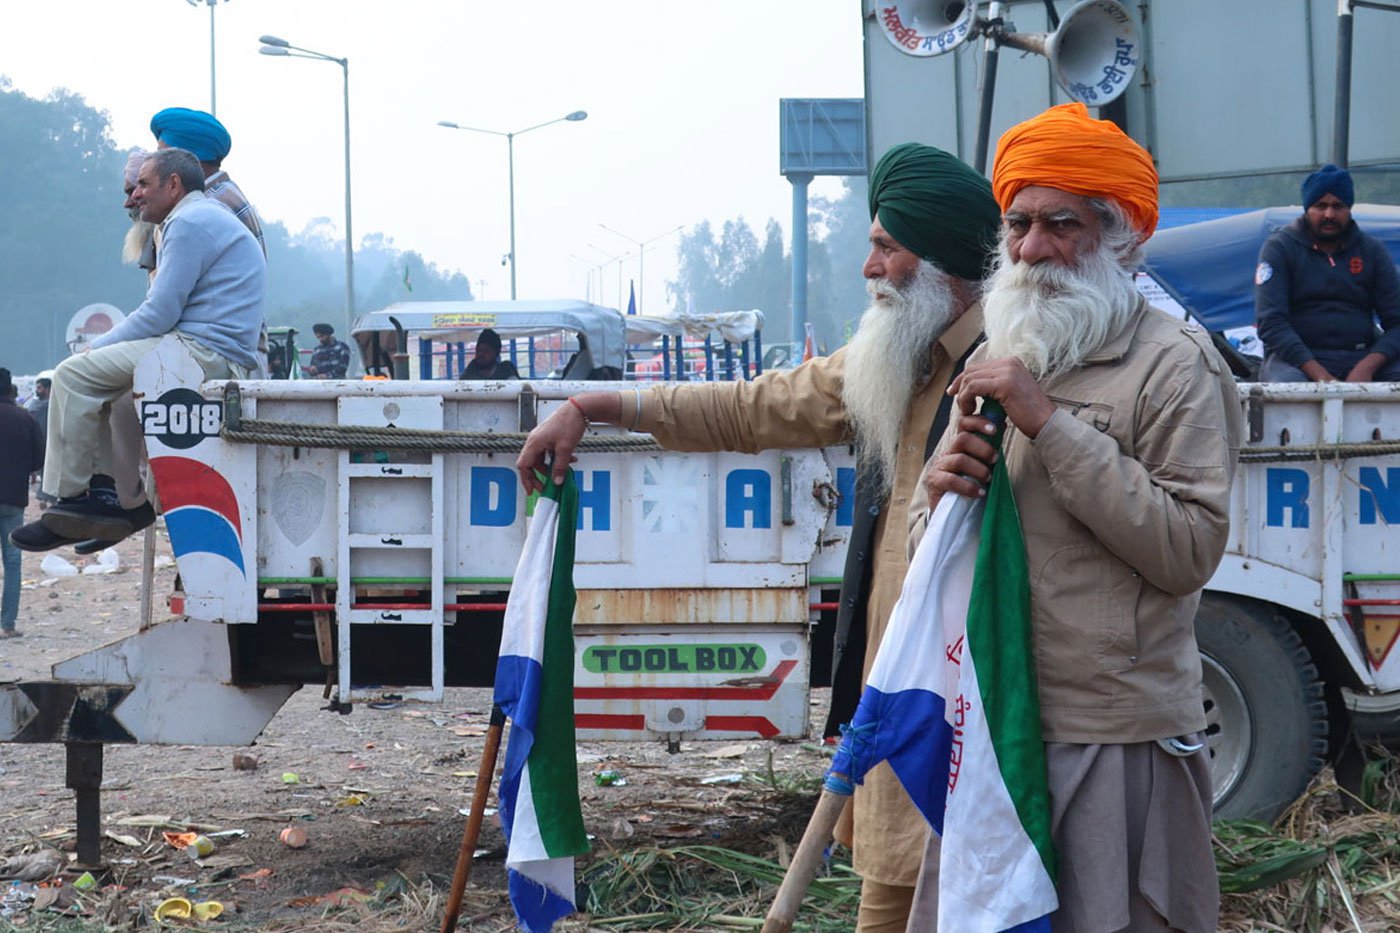 Elderly farmers using the flag poles as support while listening to the speakers at the protest site